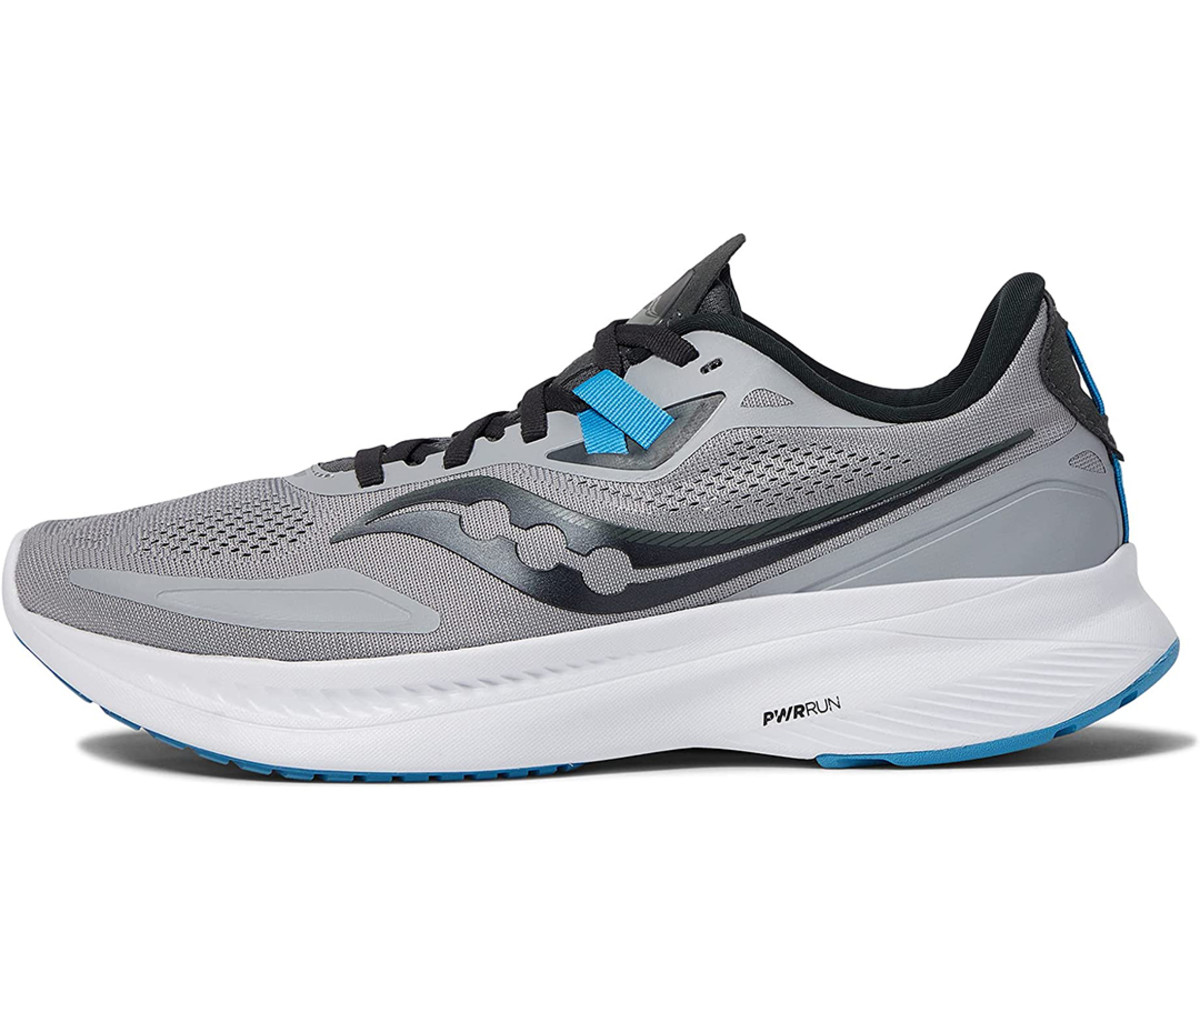 Saucony Running Shoes Are Half Off During Zappos' Sale - Men's Journal